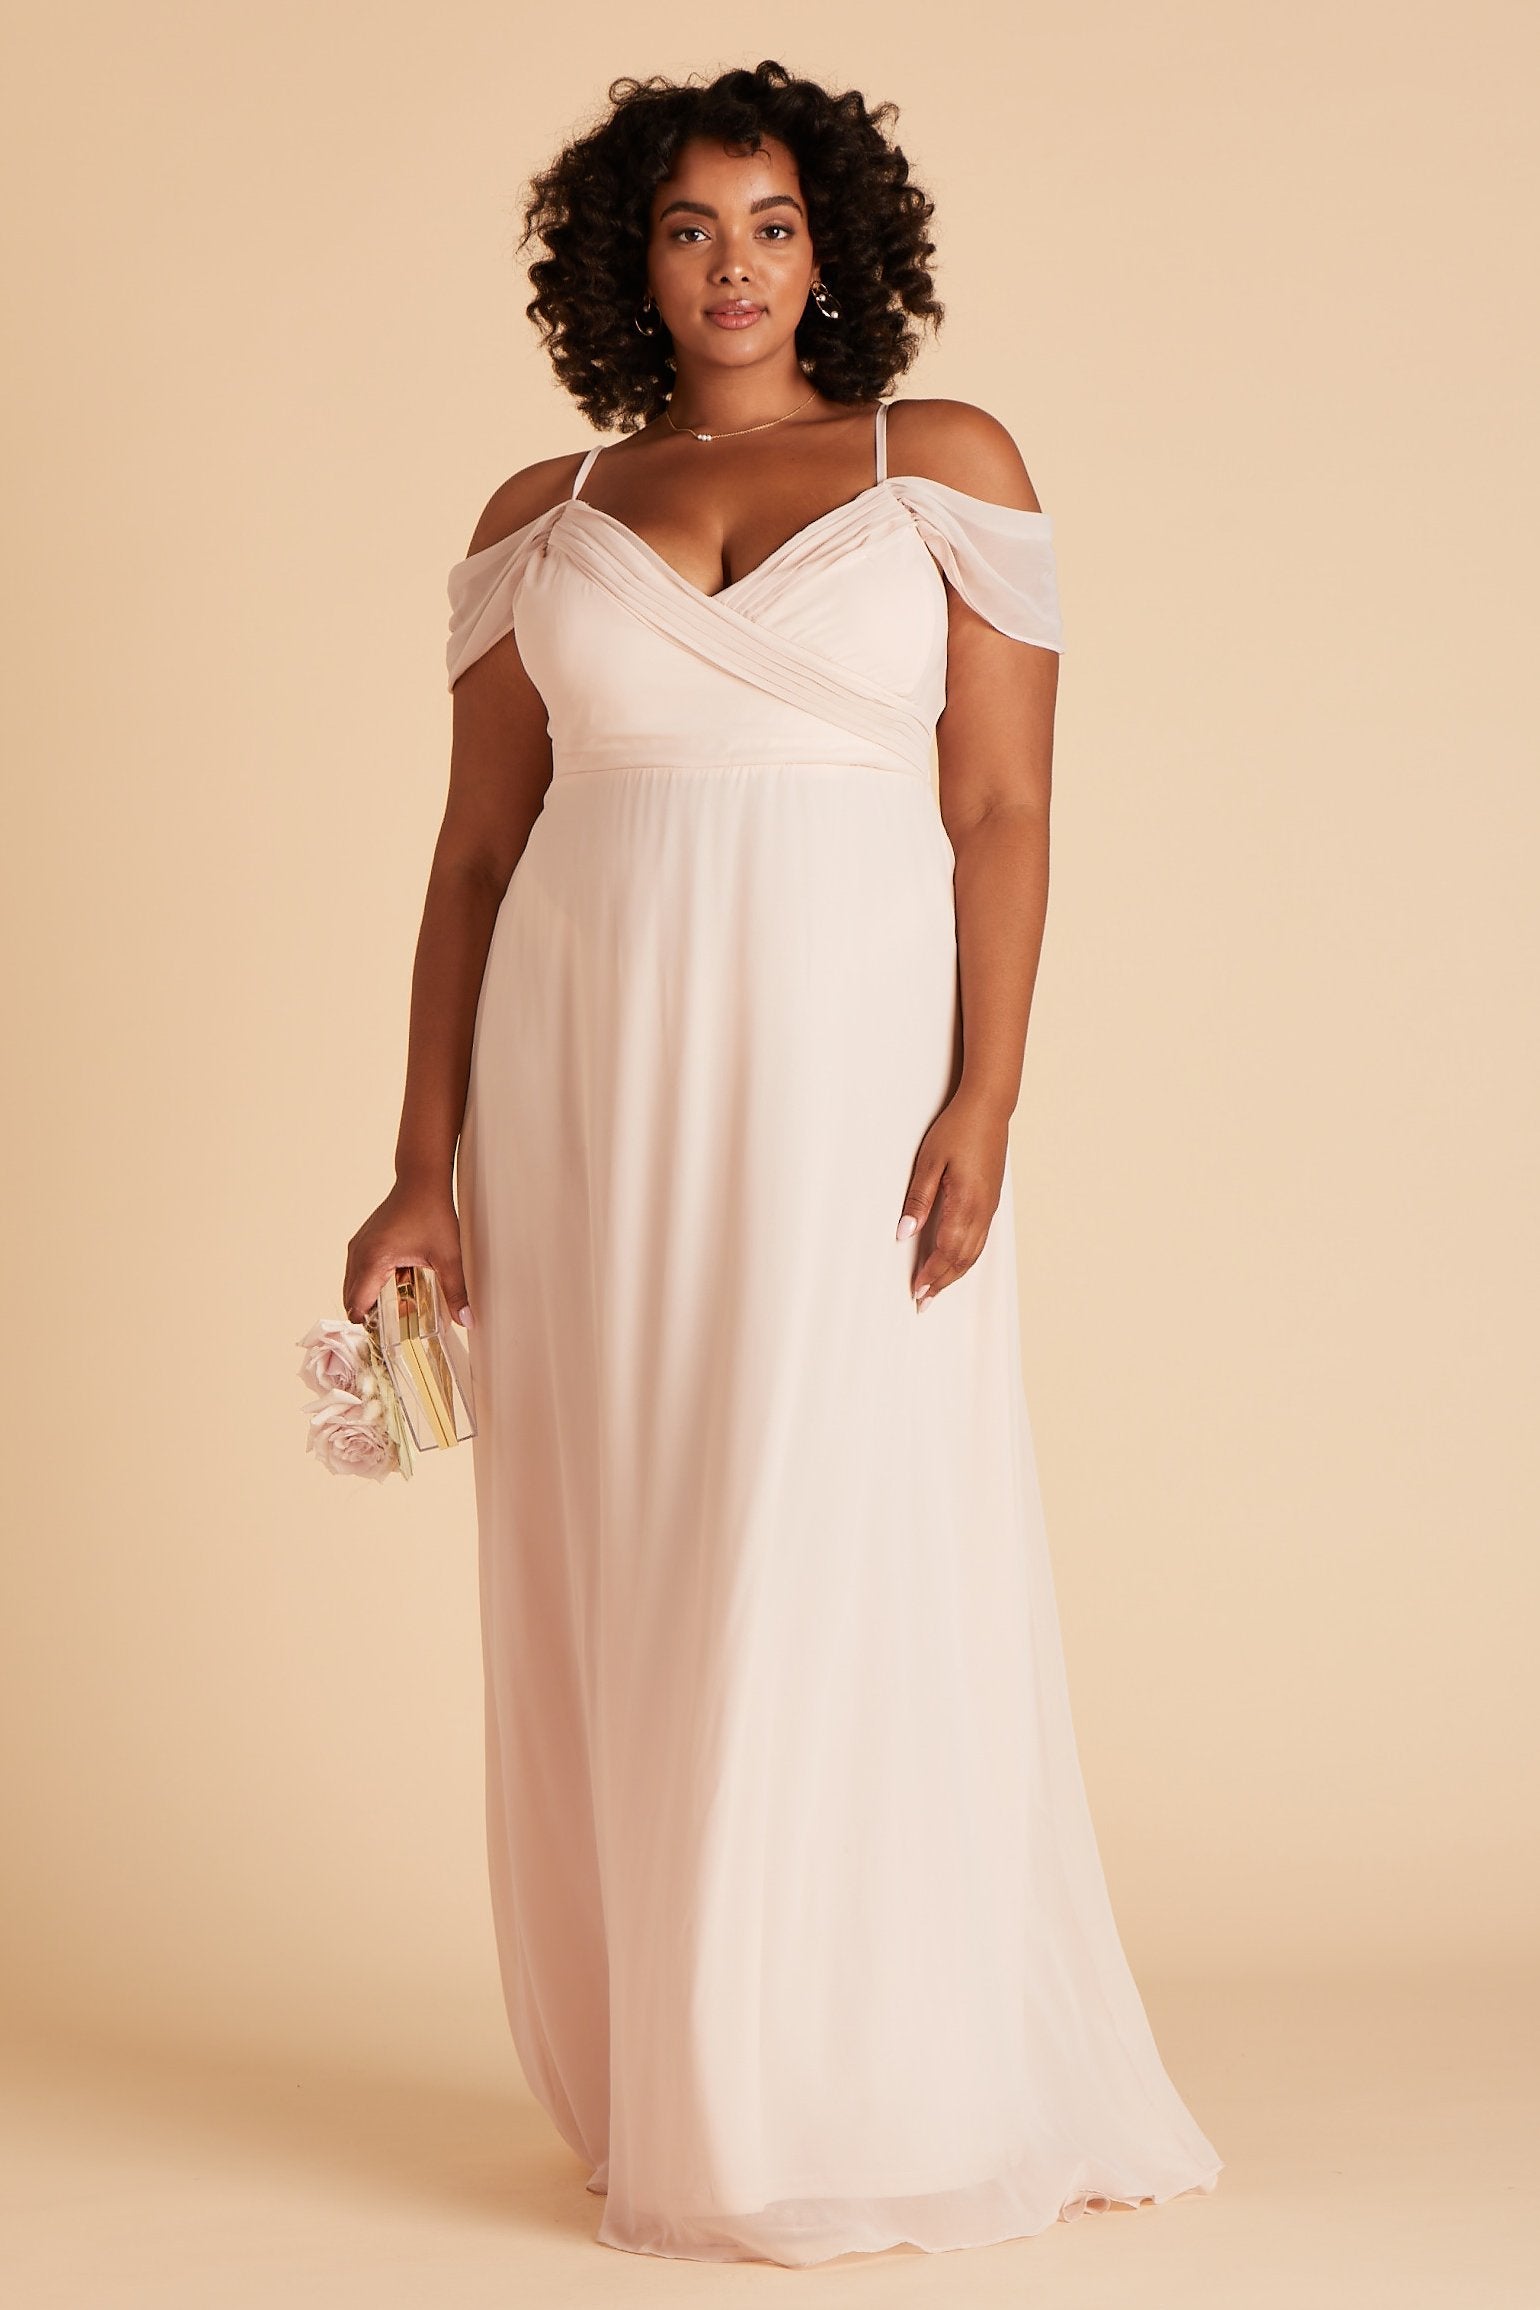 Spence convertible plus size bridesmaid dress in pale blush chiffon by Birdy Grey, front view